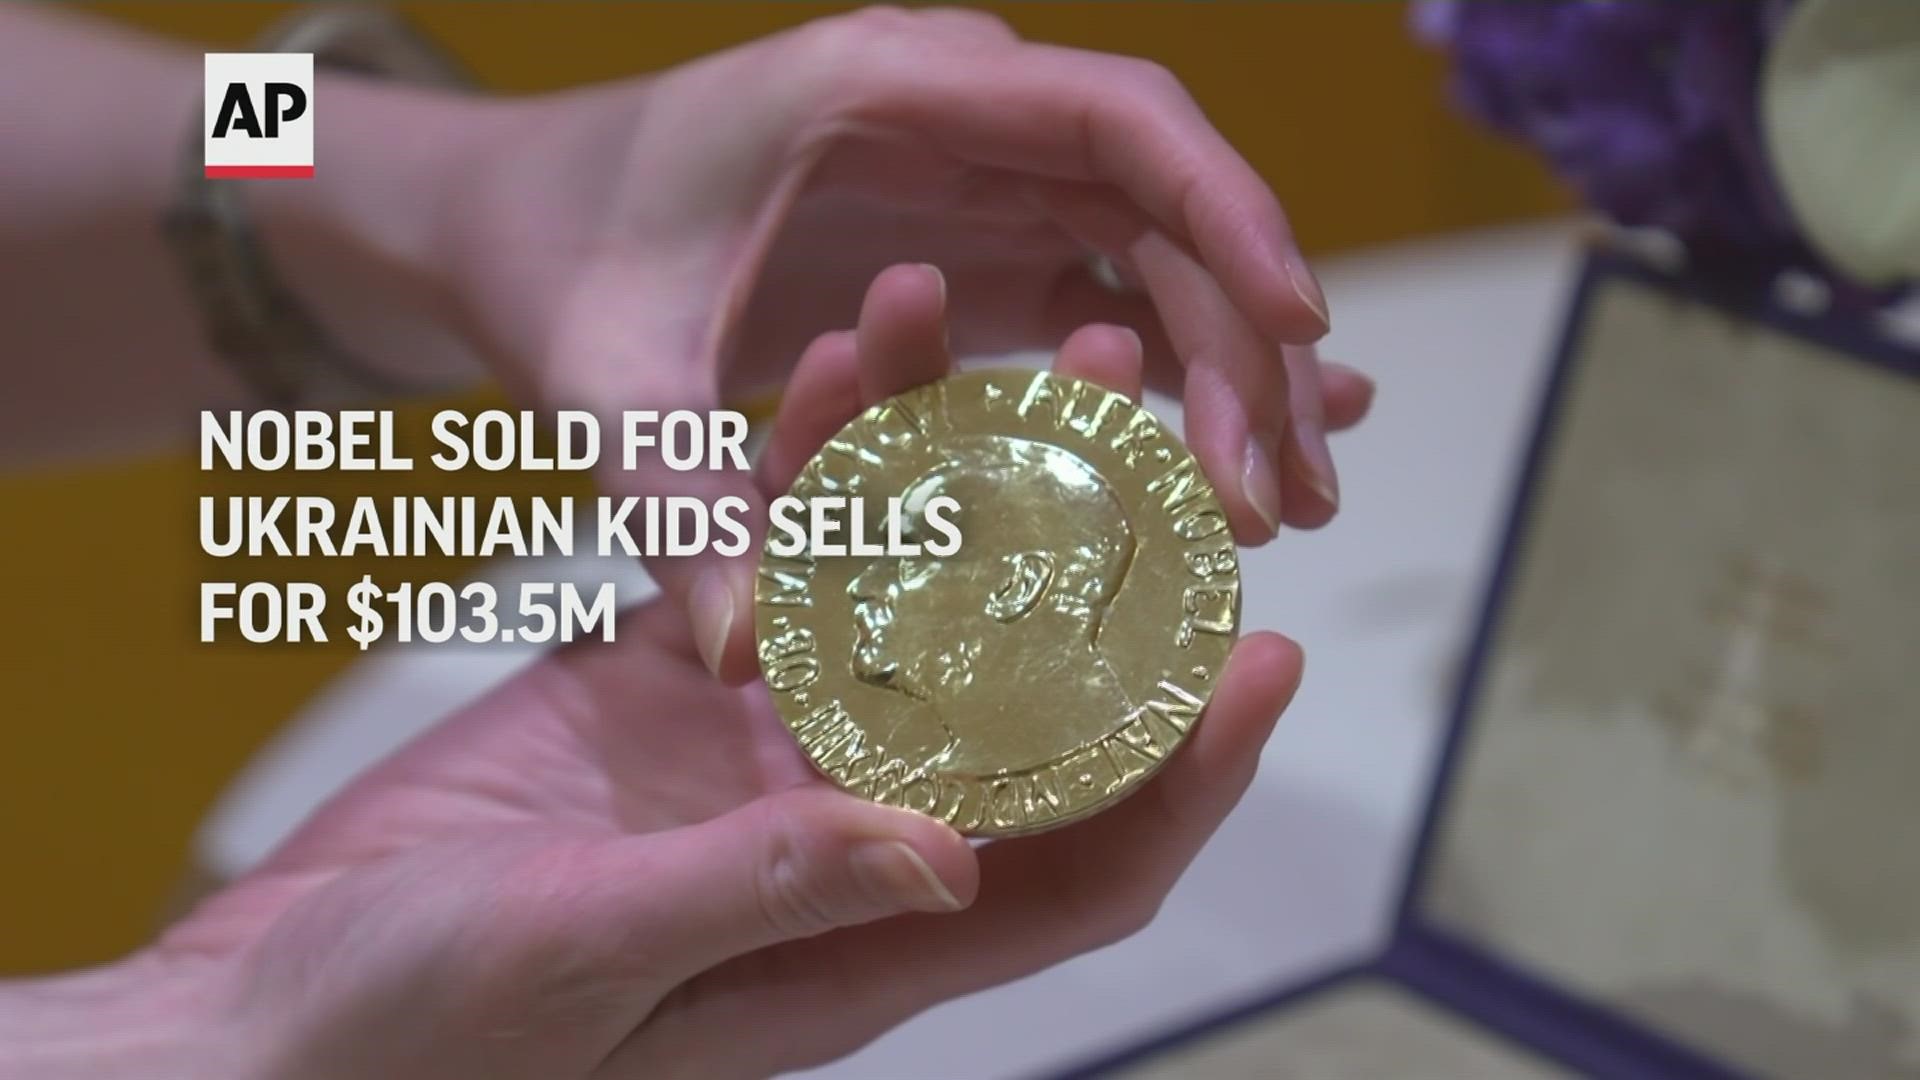 The Nobel Peace Prize auctioned off by a Russian journalist to raise money for Ukrainian child refugees shattered the old record by nearly $99 million.